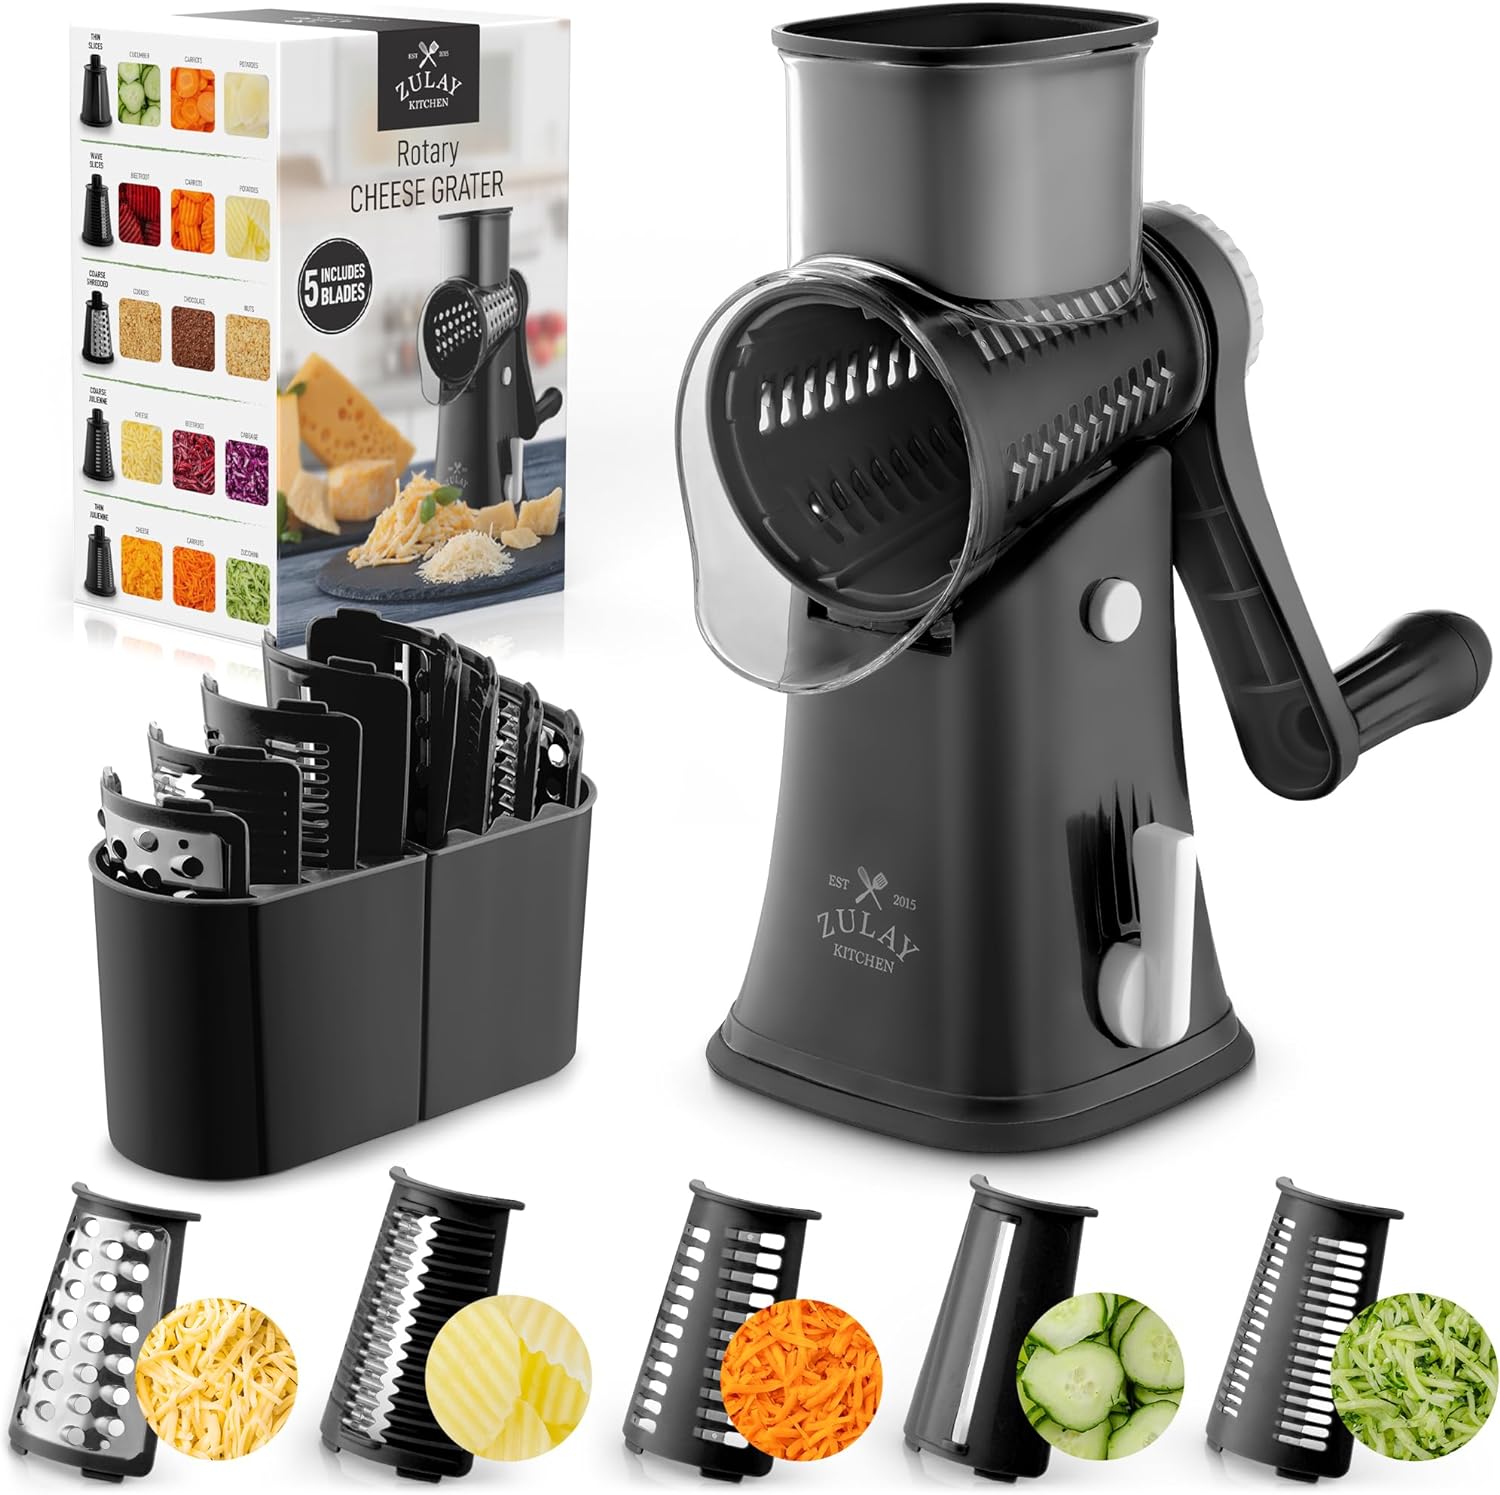 Zulay Kitchen Cheese Grater With Easy Grip Handle, 1 - Harris Teeter